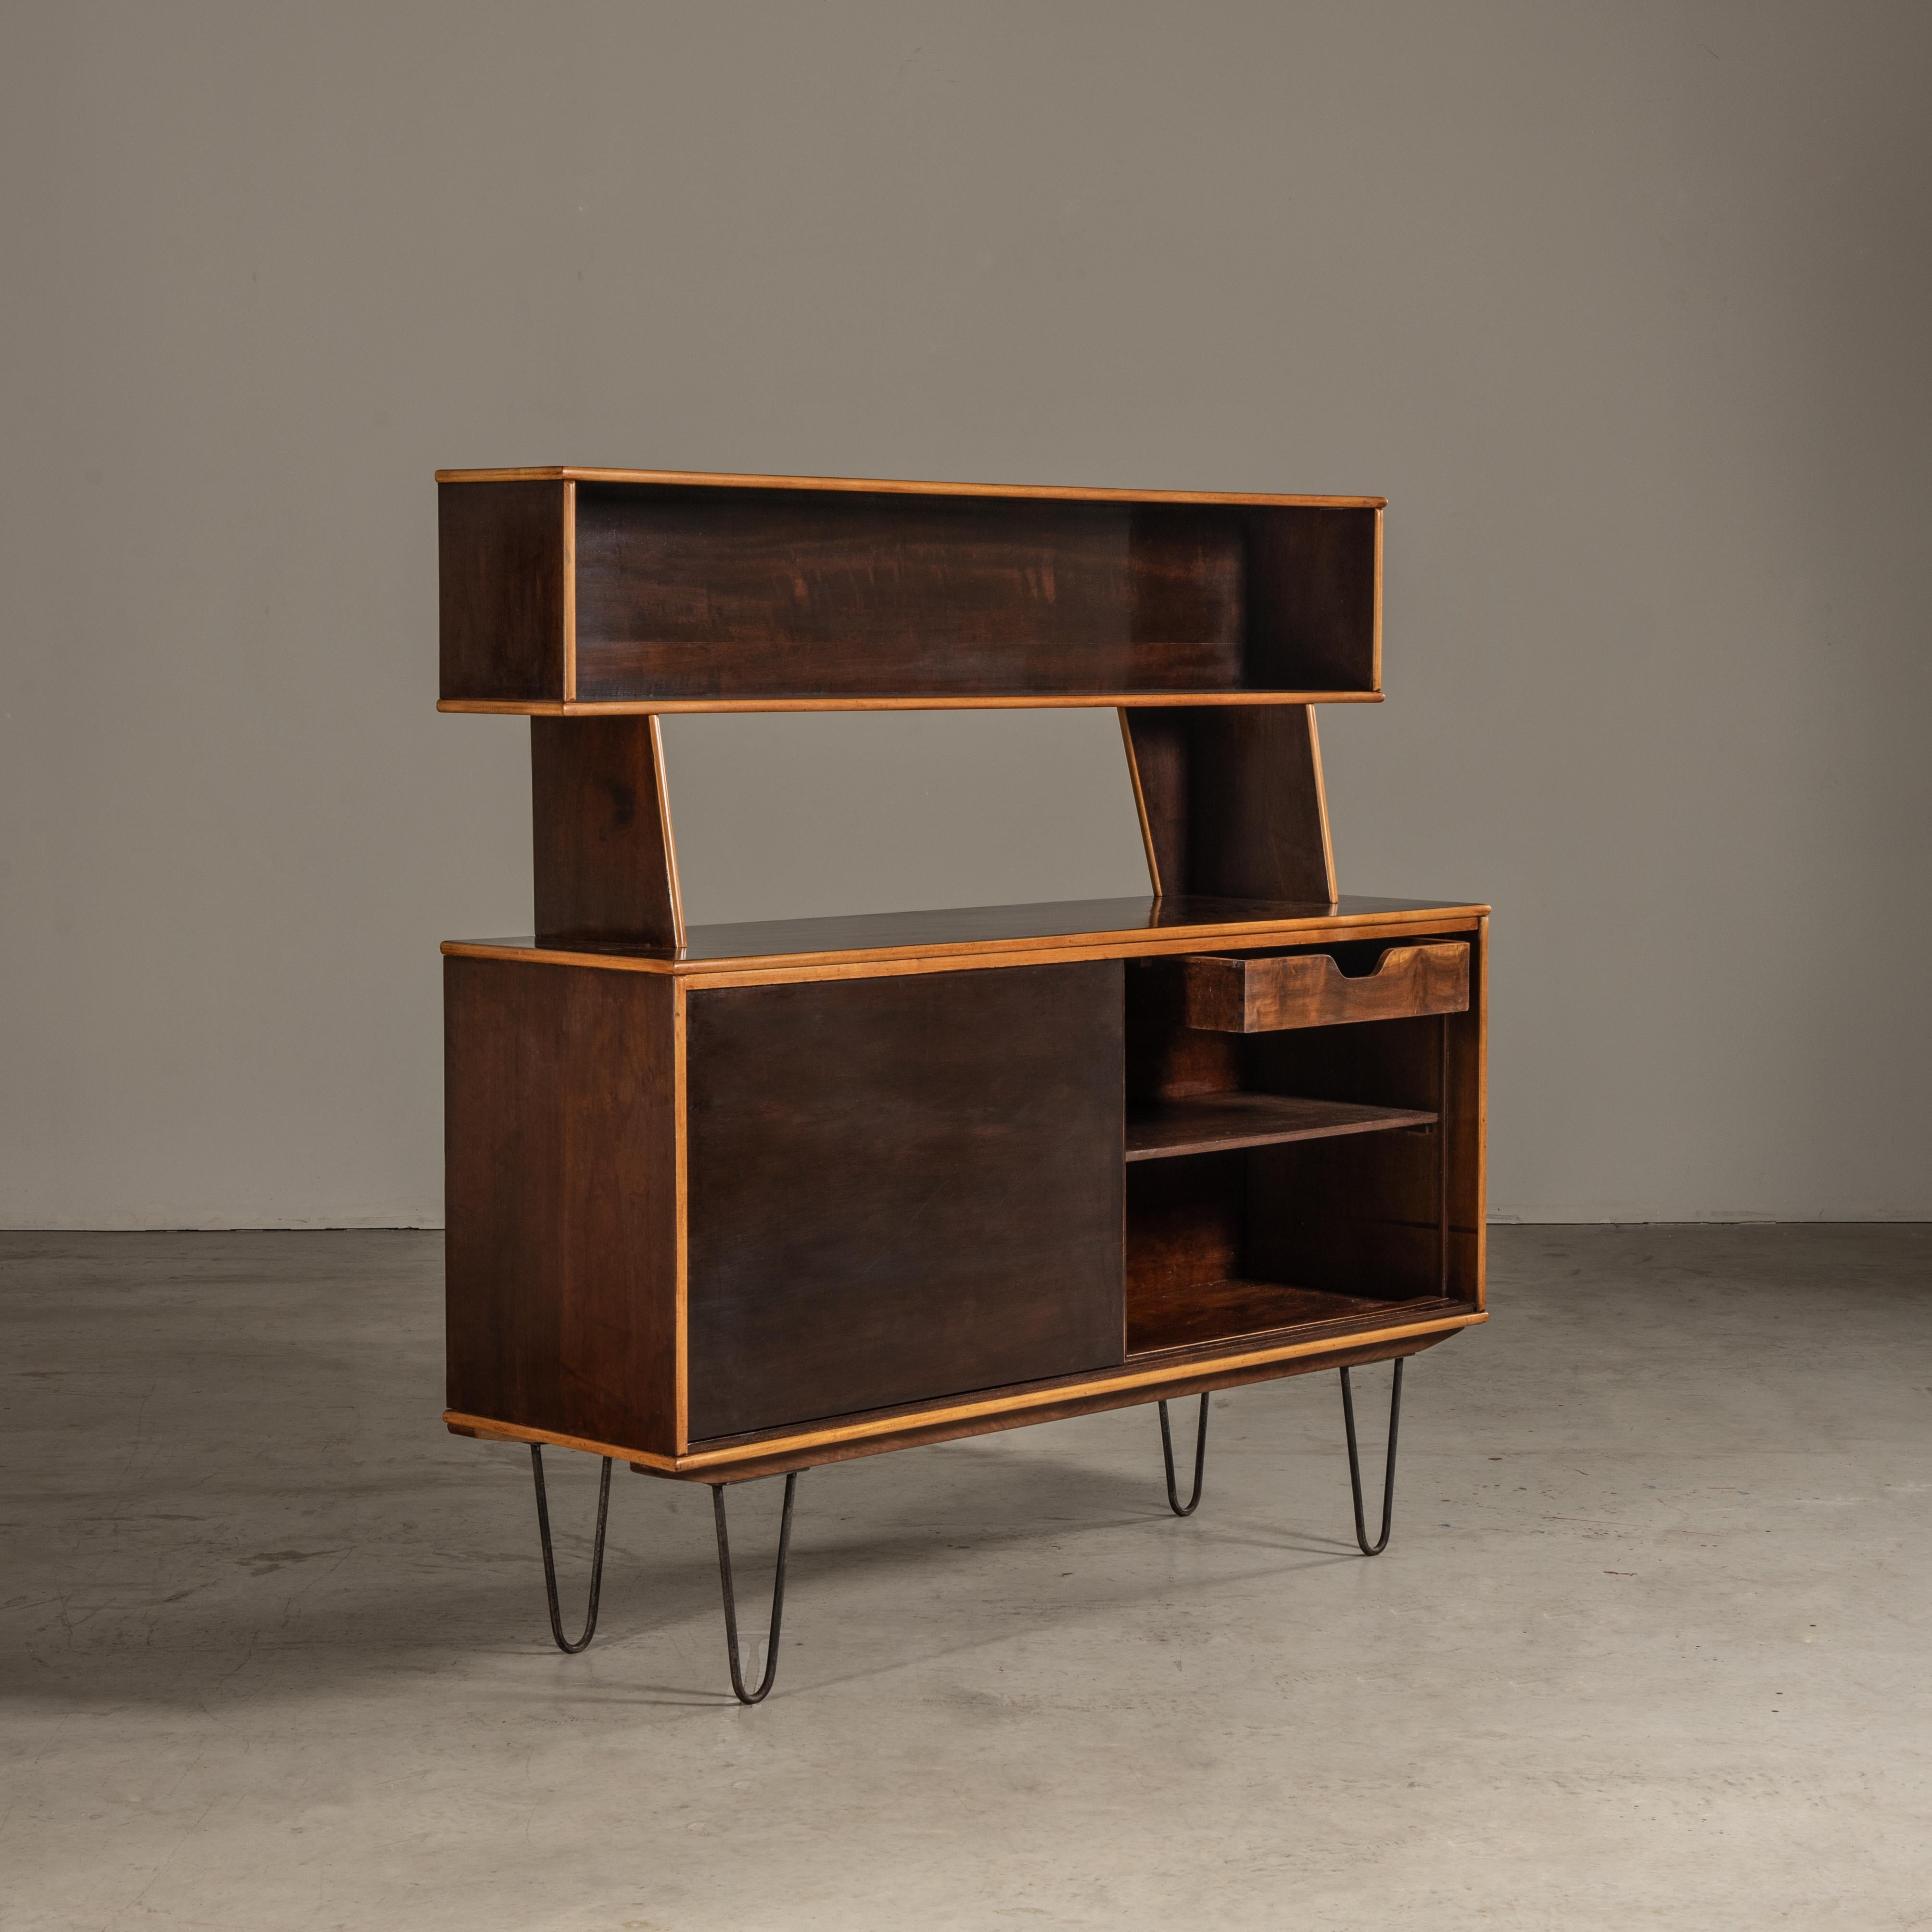 This wooden sideboard was designed by Martin Eisler. Martin Eisler was a key figure in Brazilian furniture design during the mid-20th century, known for his significant contributions to modern design. His work is often associated with a style that